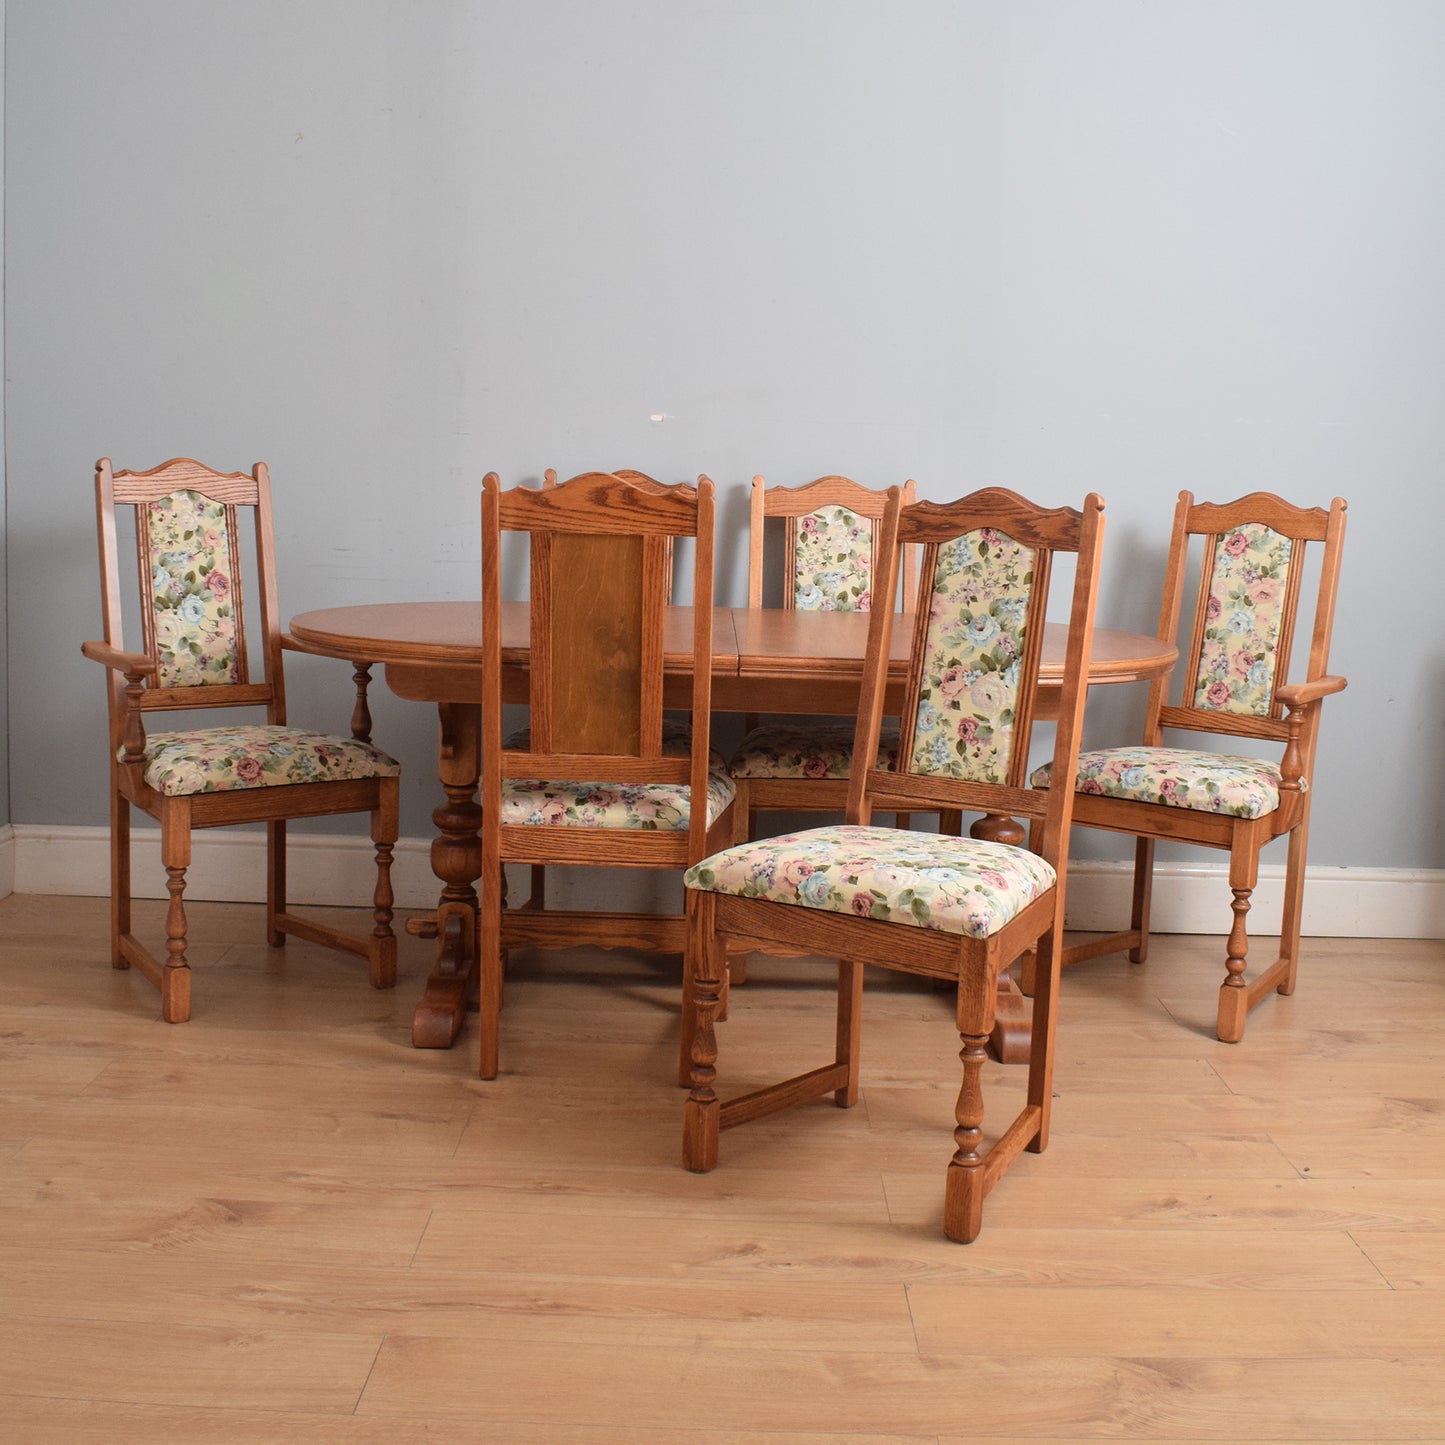 Old Charm Table and Six Chairs